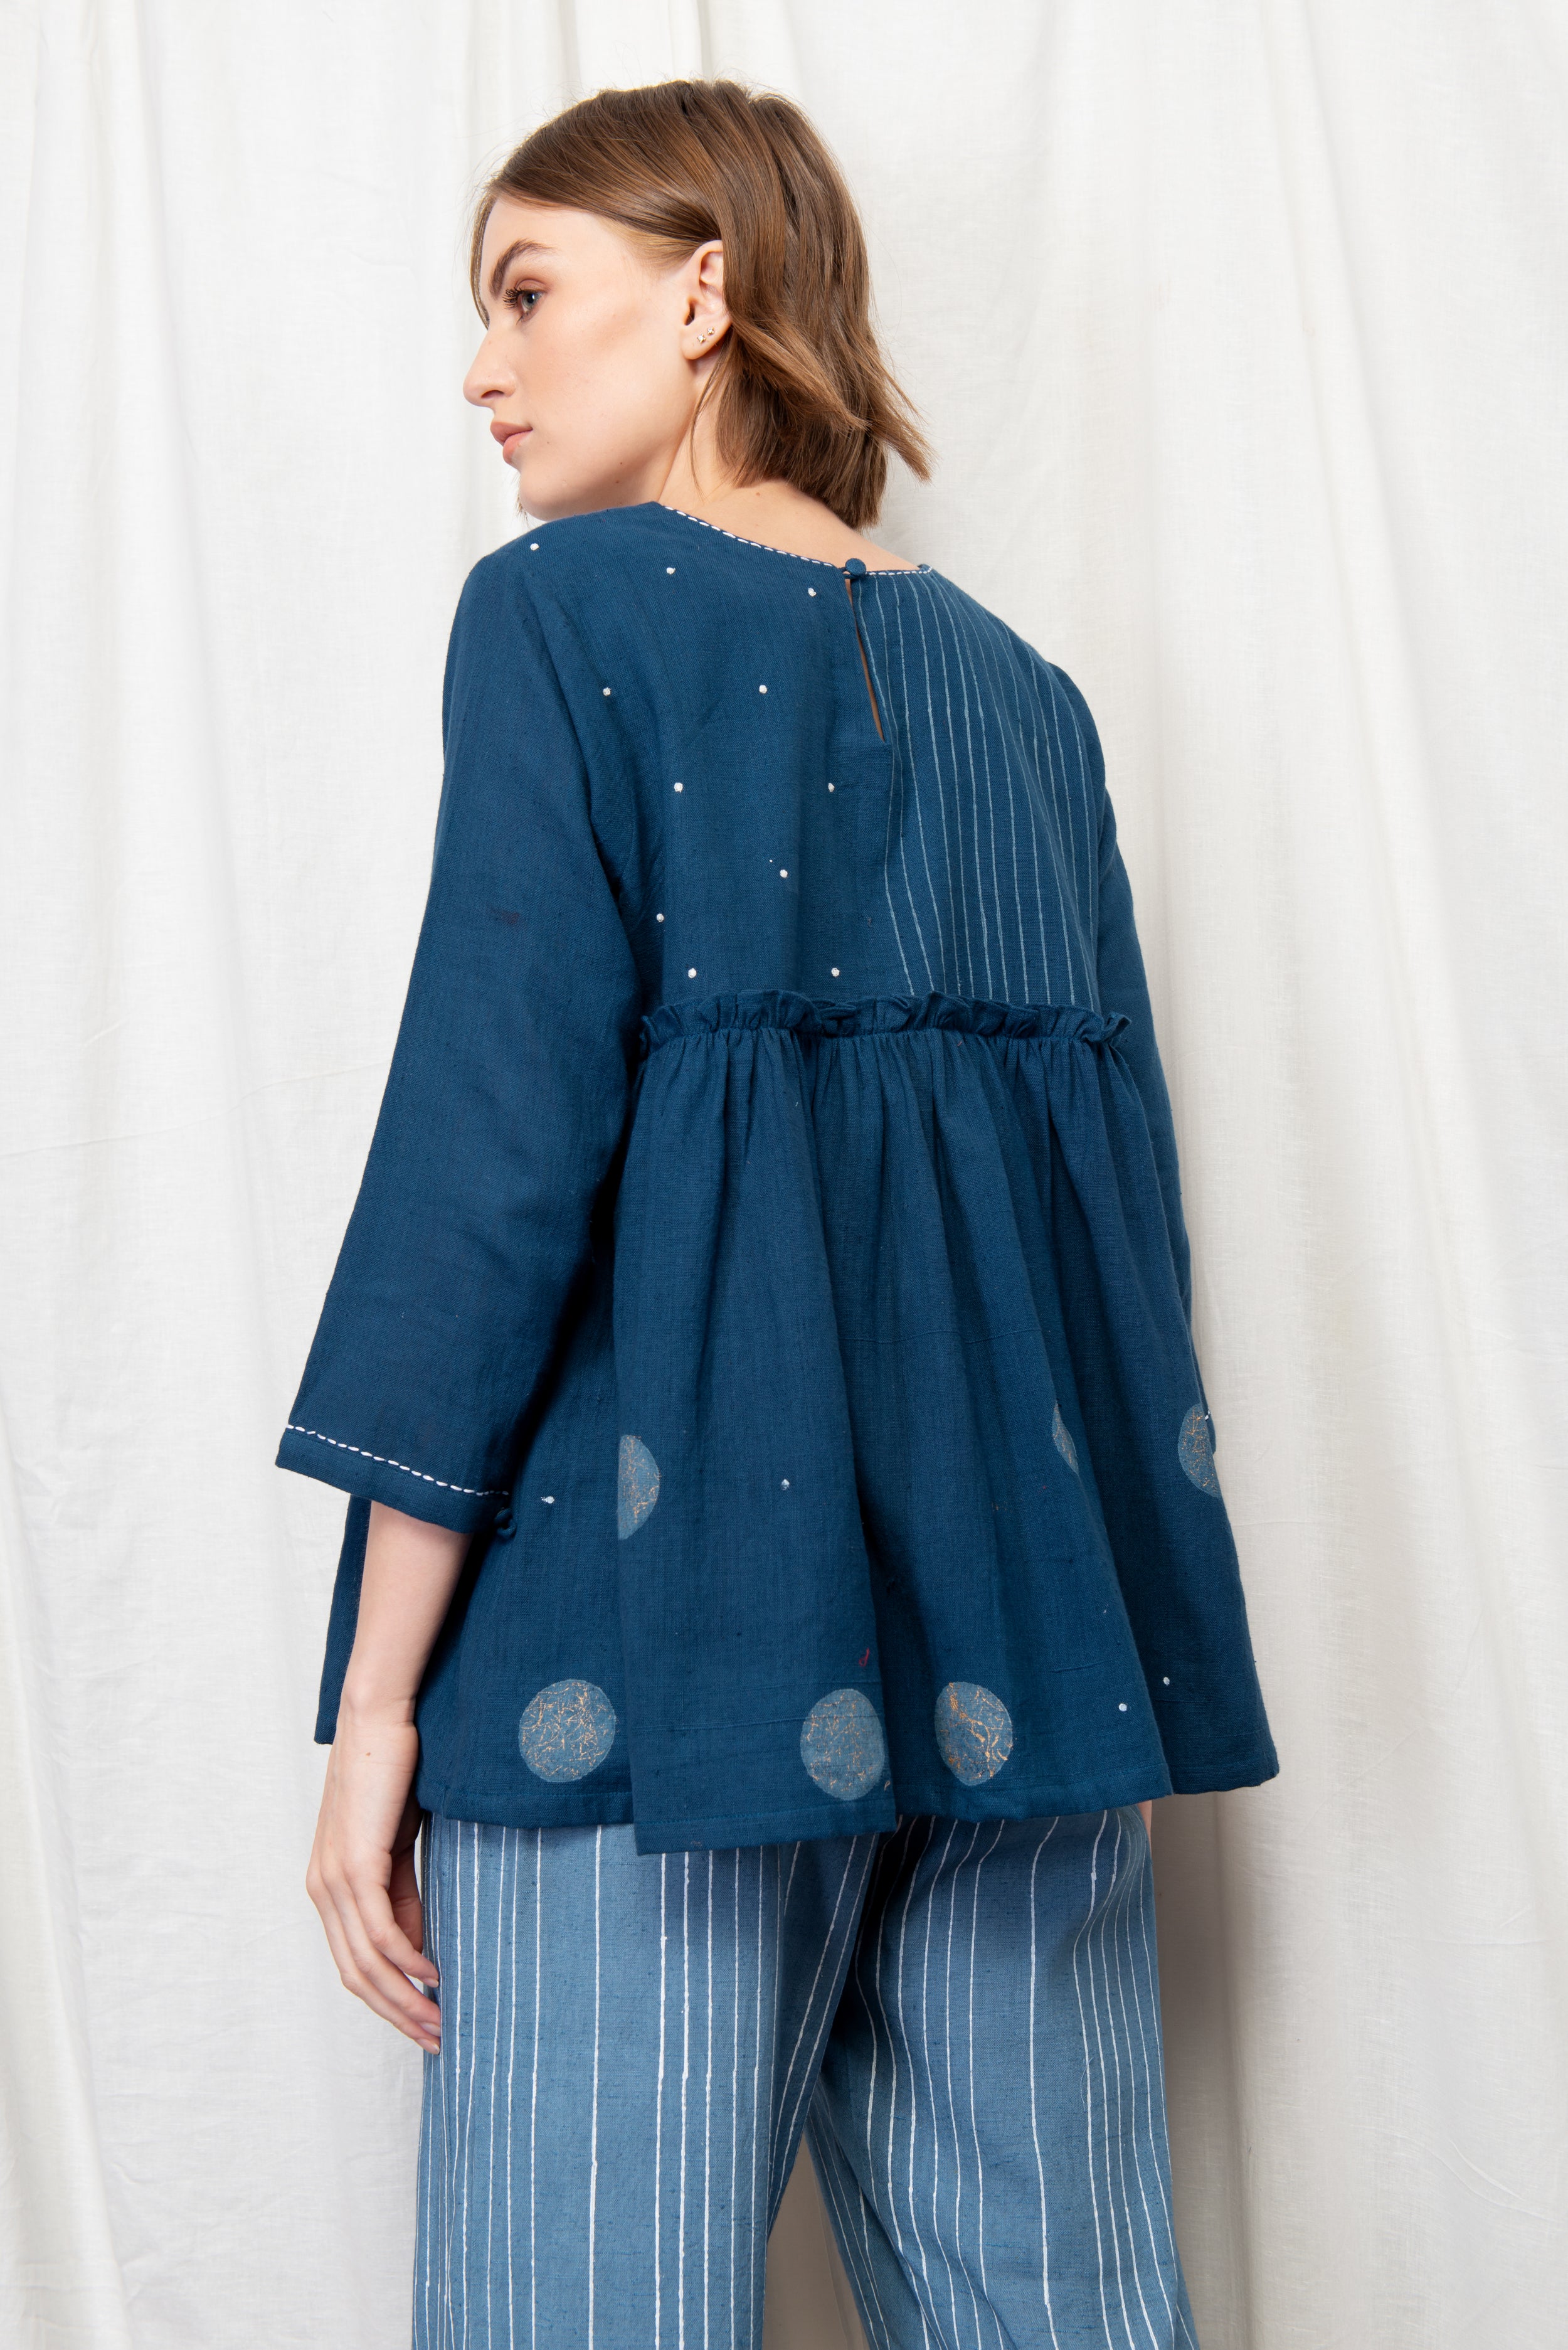 BELLE INDIE TUNIC